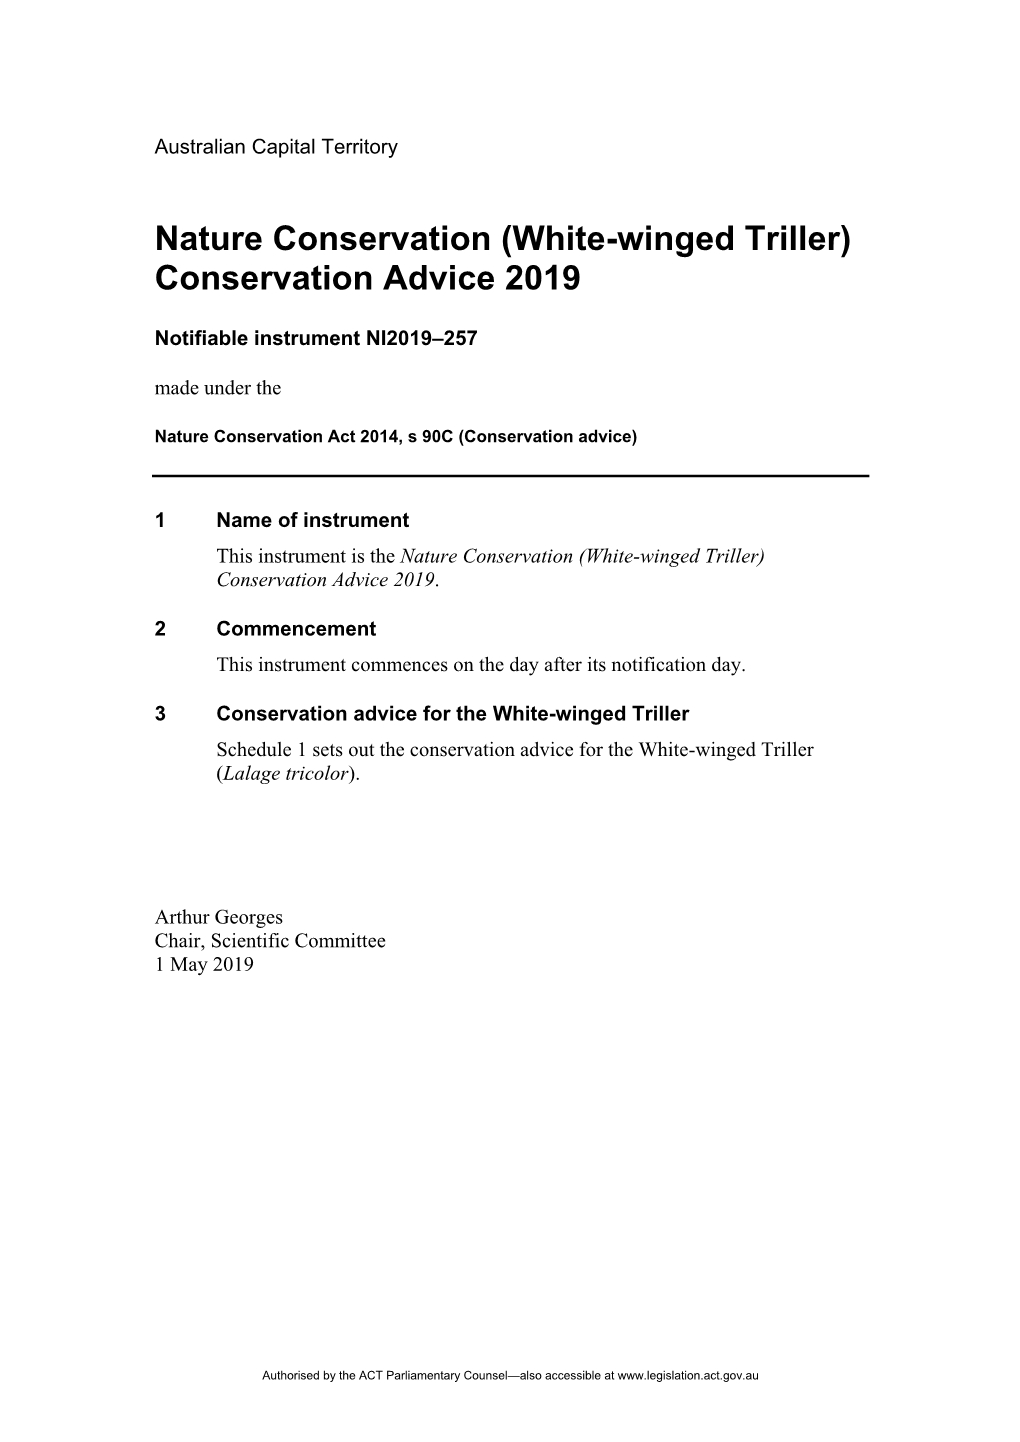 (White-Winged Triller) Conservation Advice 2019